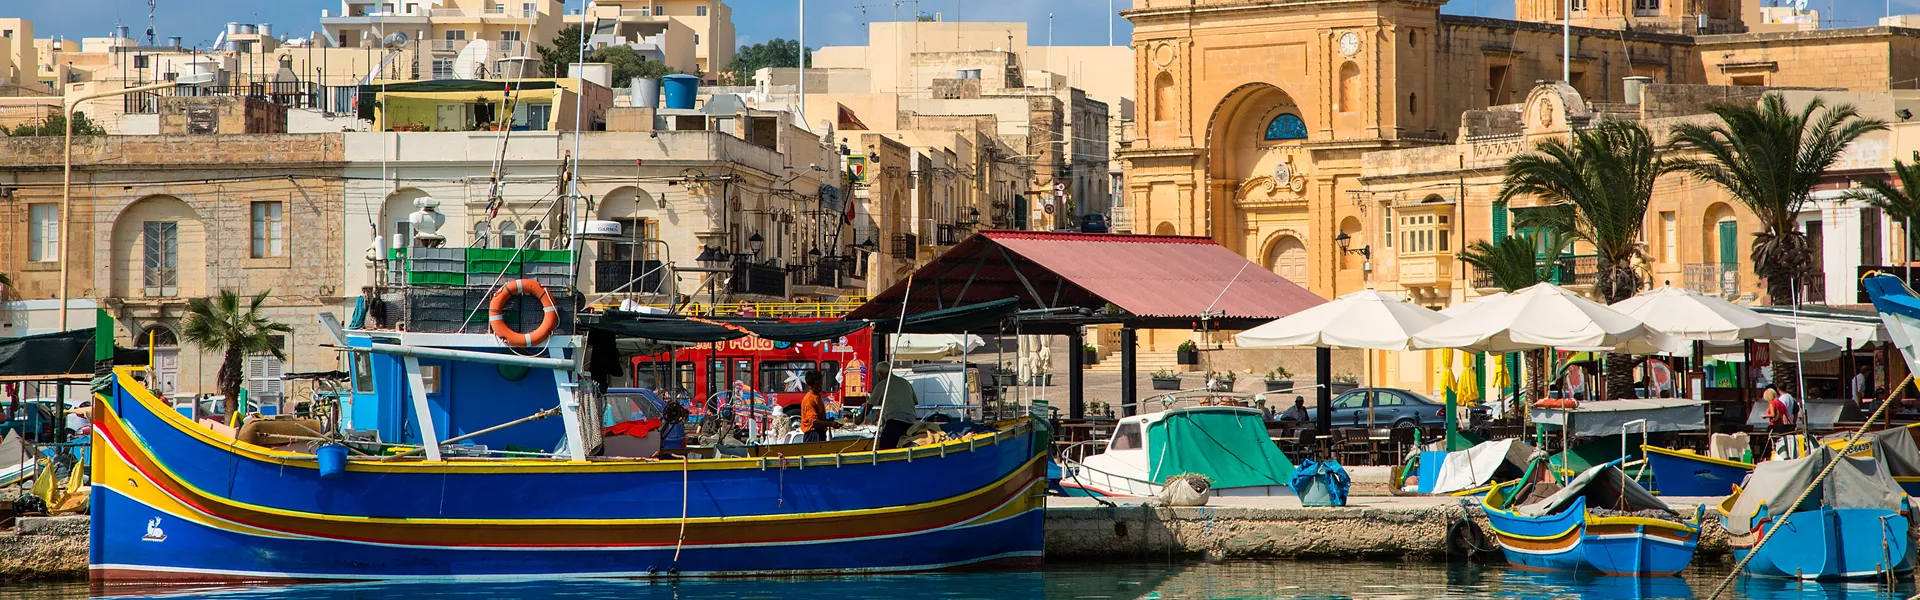 Malta Guided Tours and Travel Guide